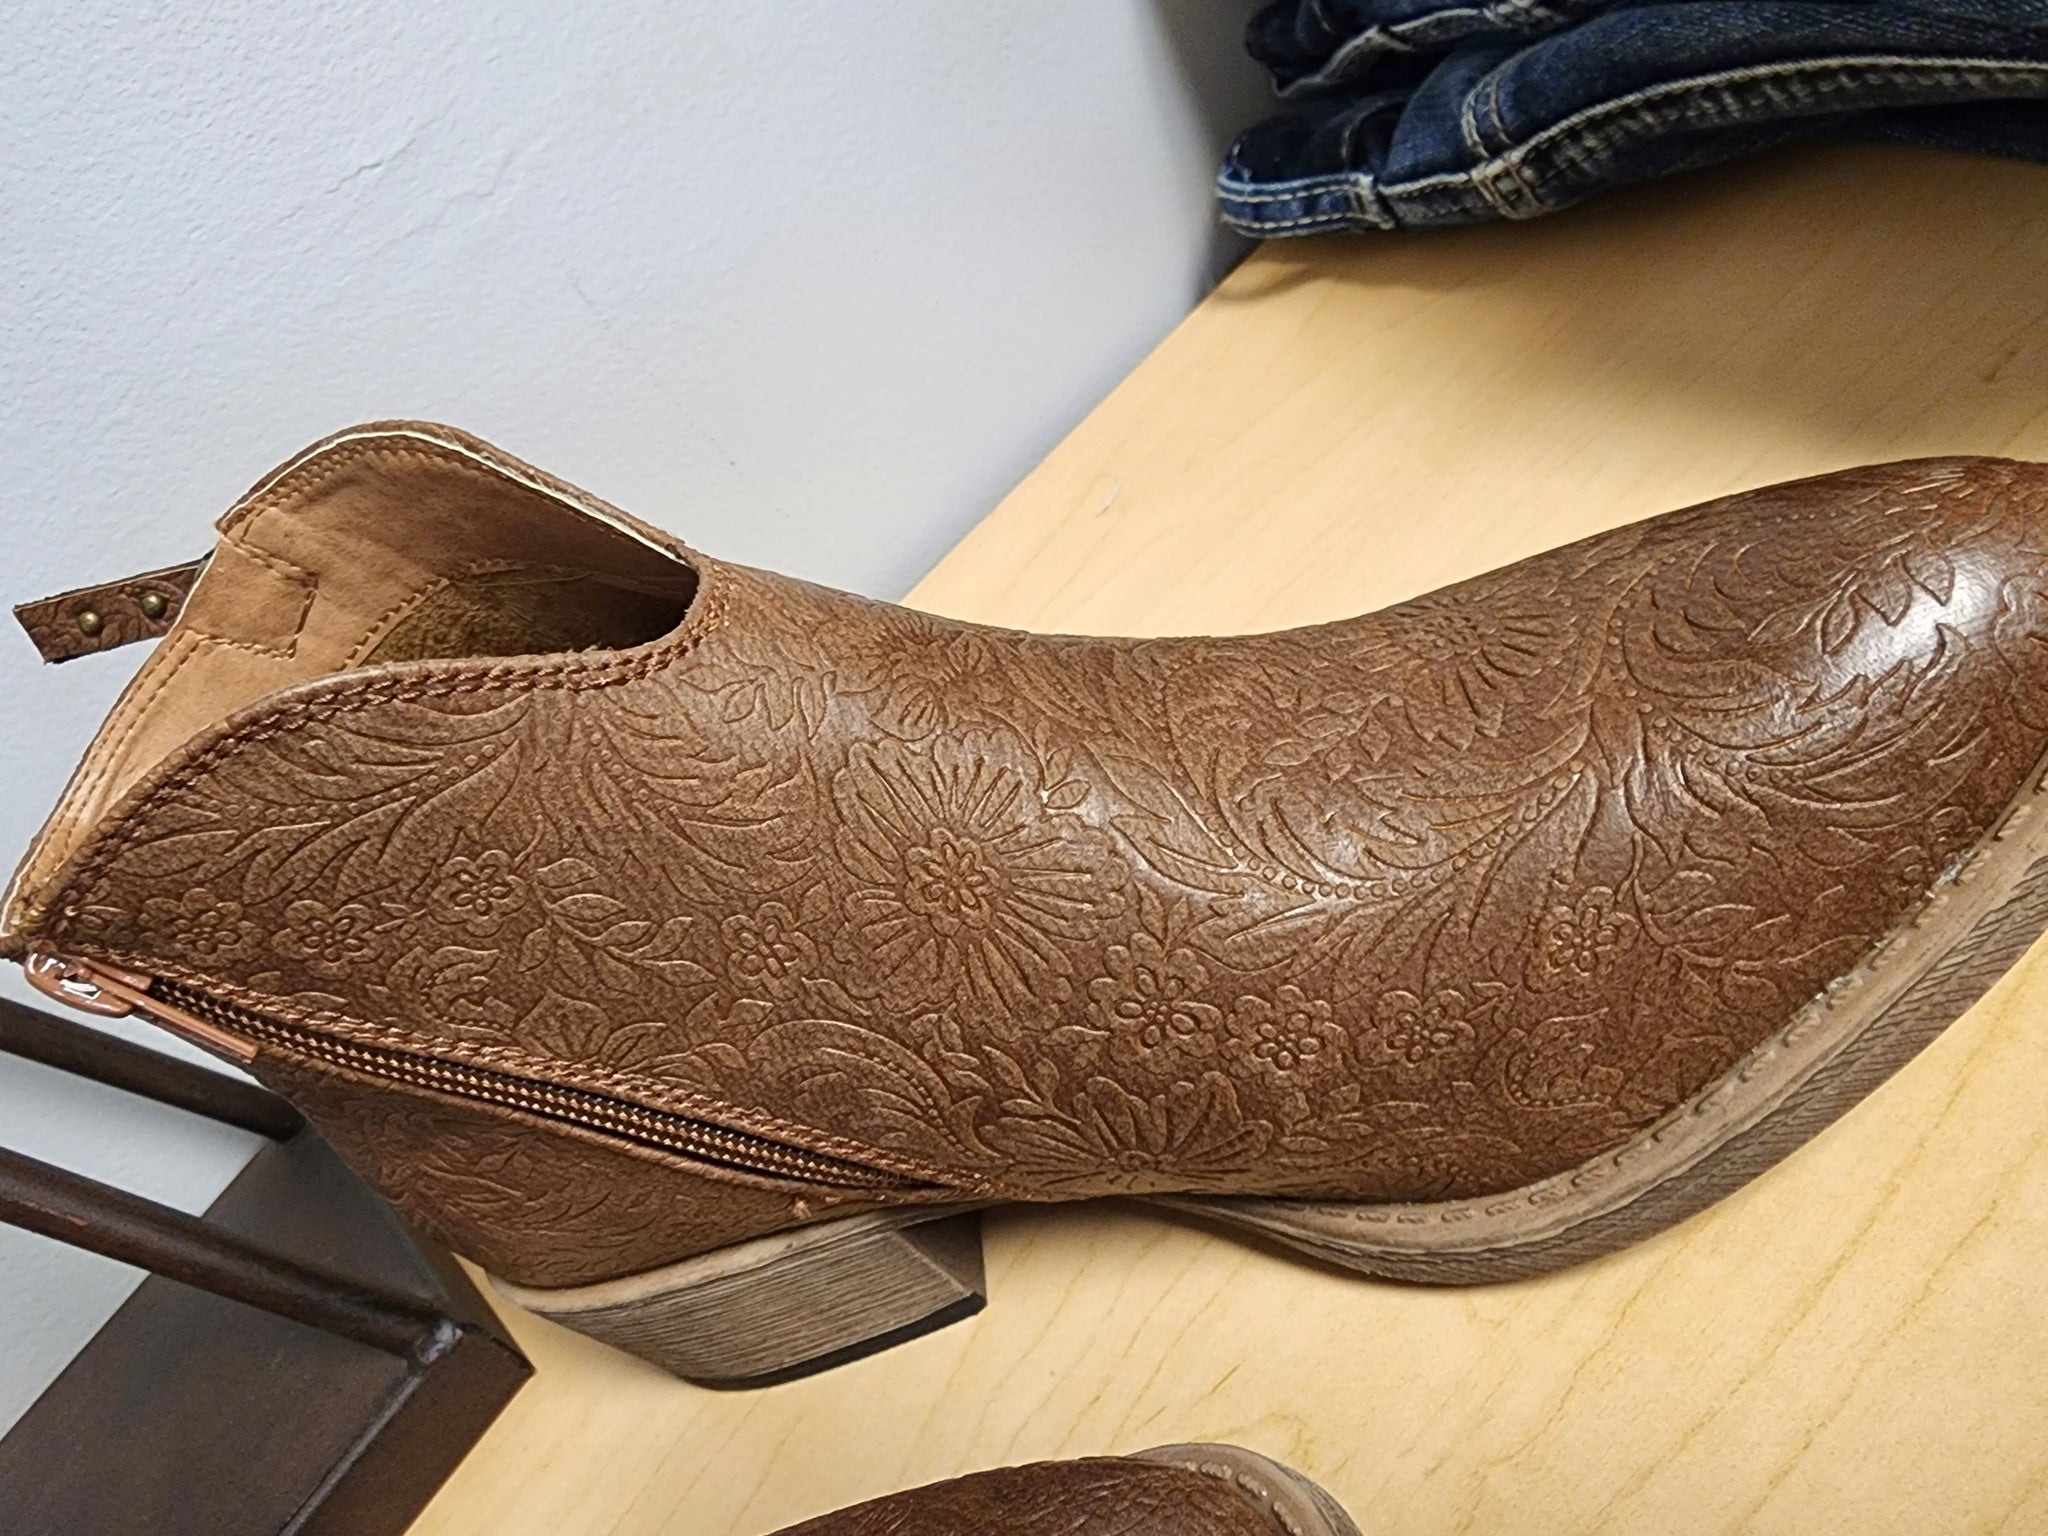 Divine tooled tan boots